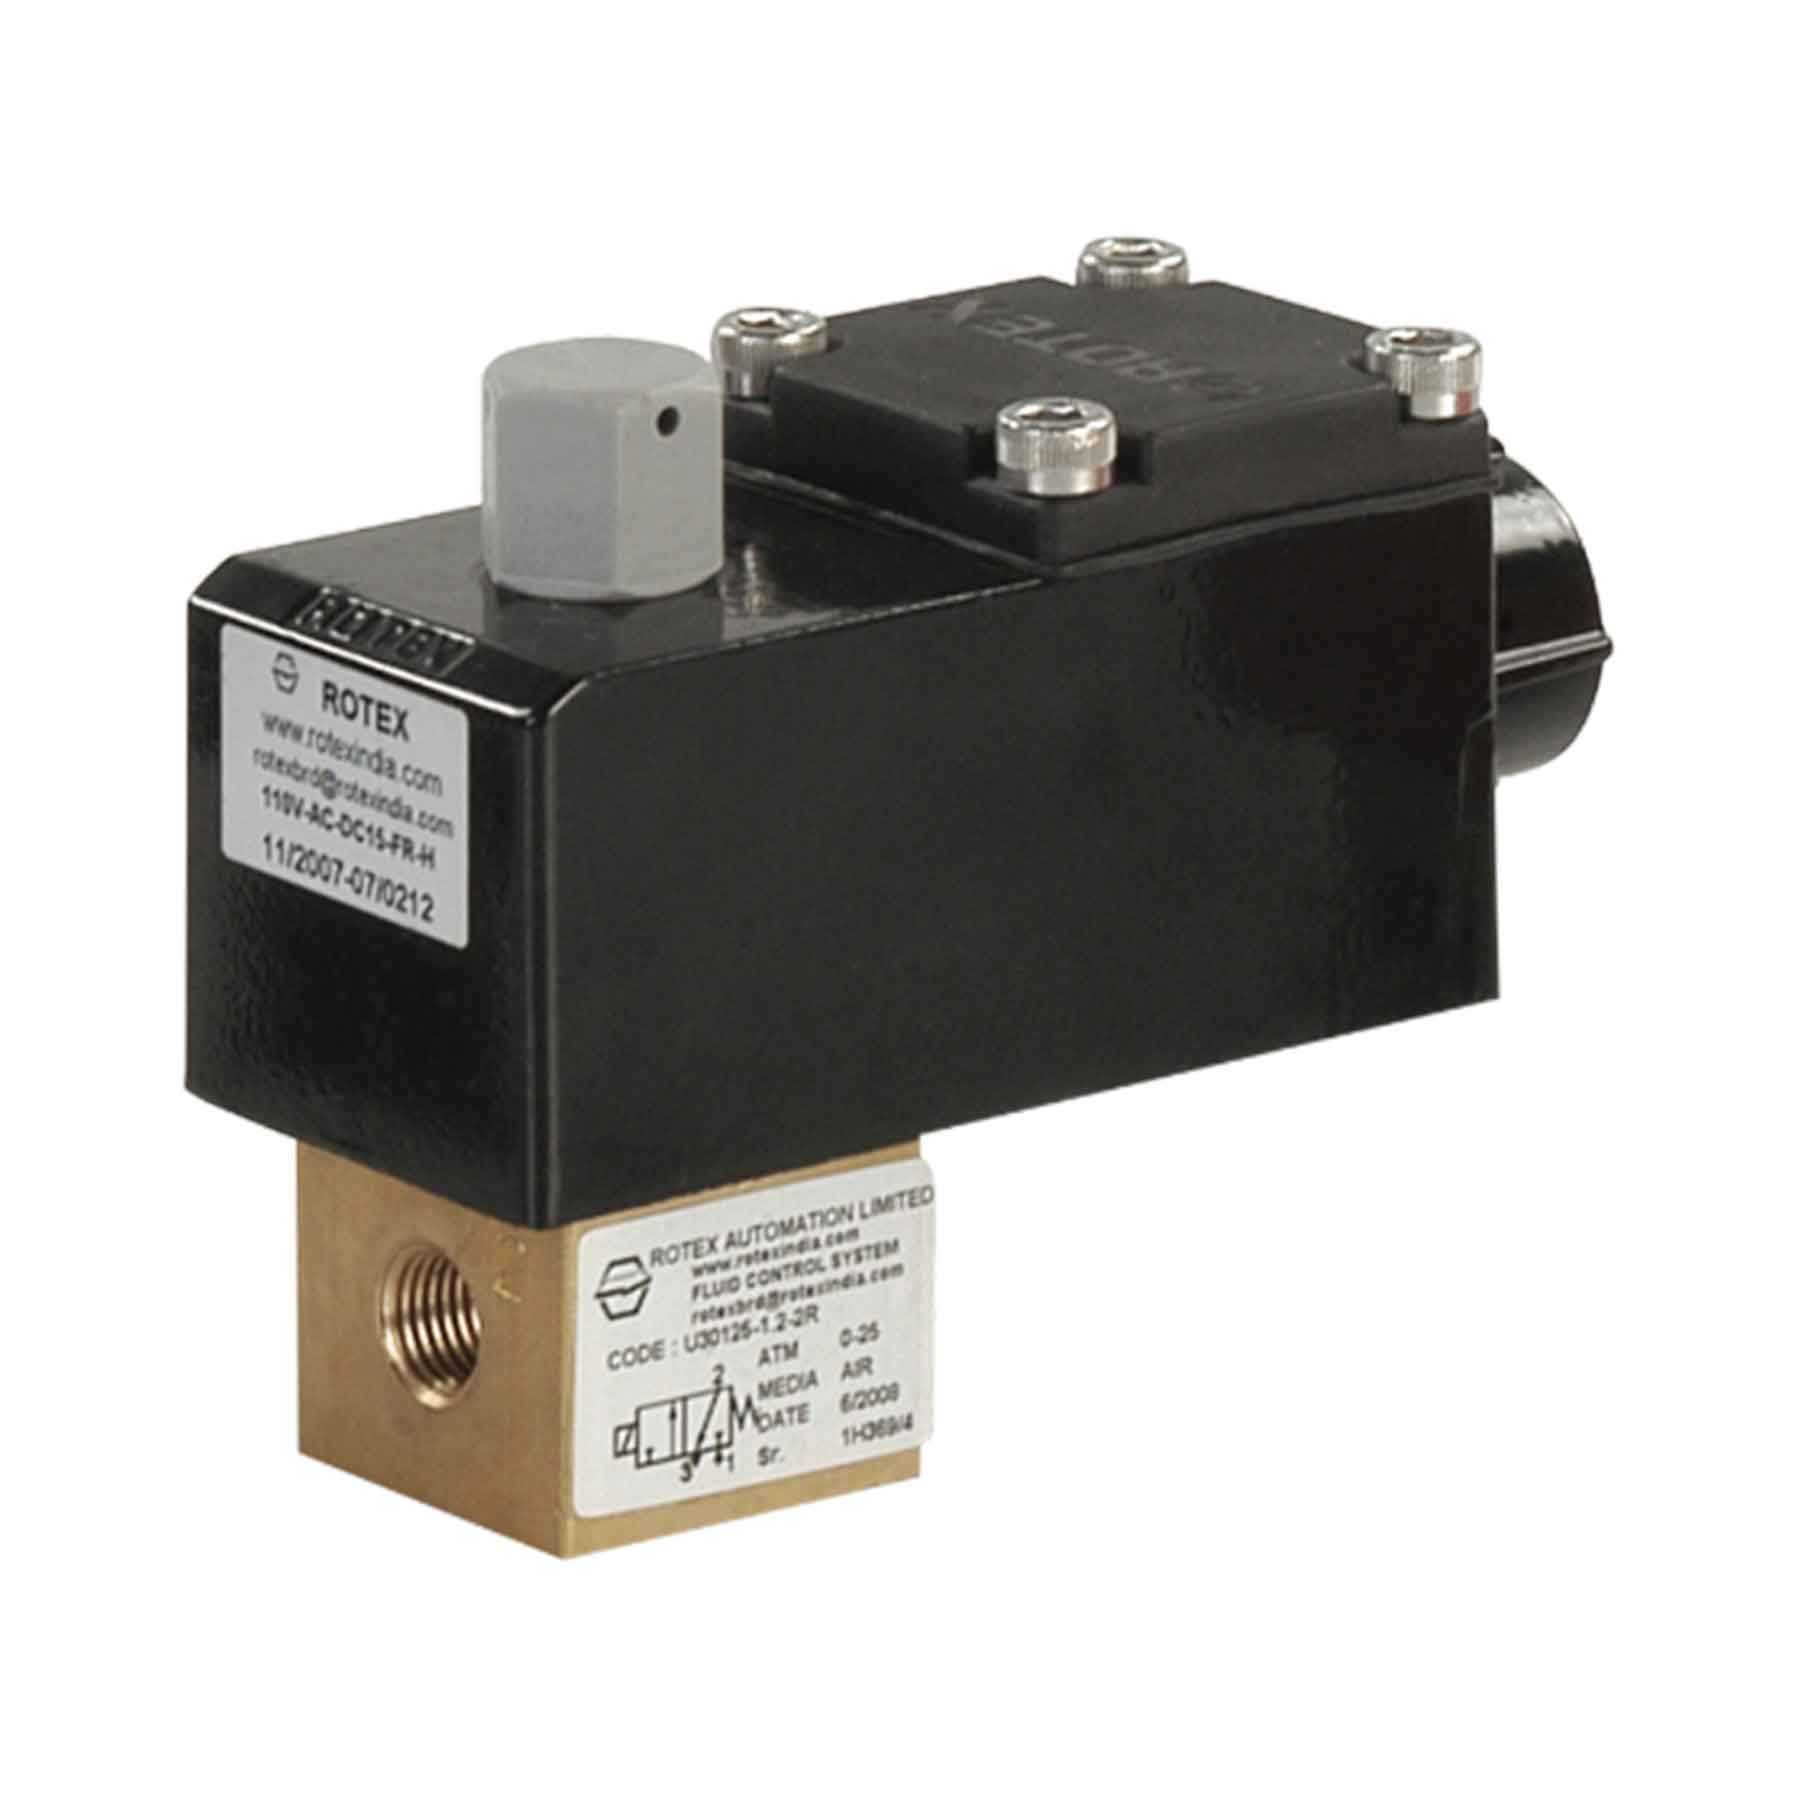 Rotex 2/2-Way Normally Closed Direct Lift Solenoid Valve 20101-2.5-2R-B5+I-24V-DC-22-HCE